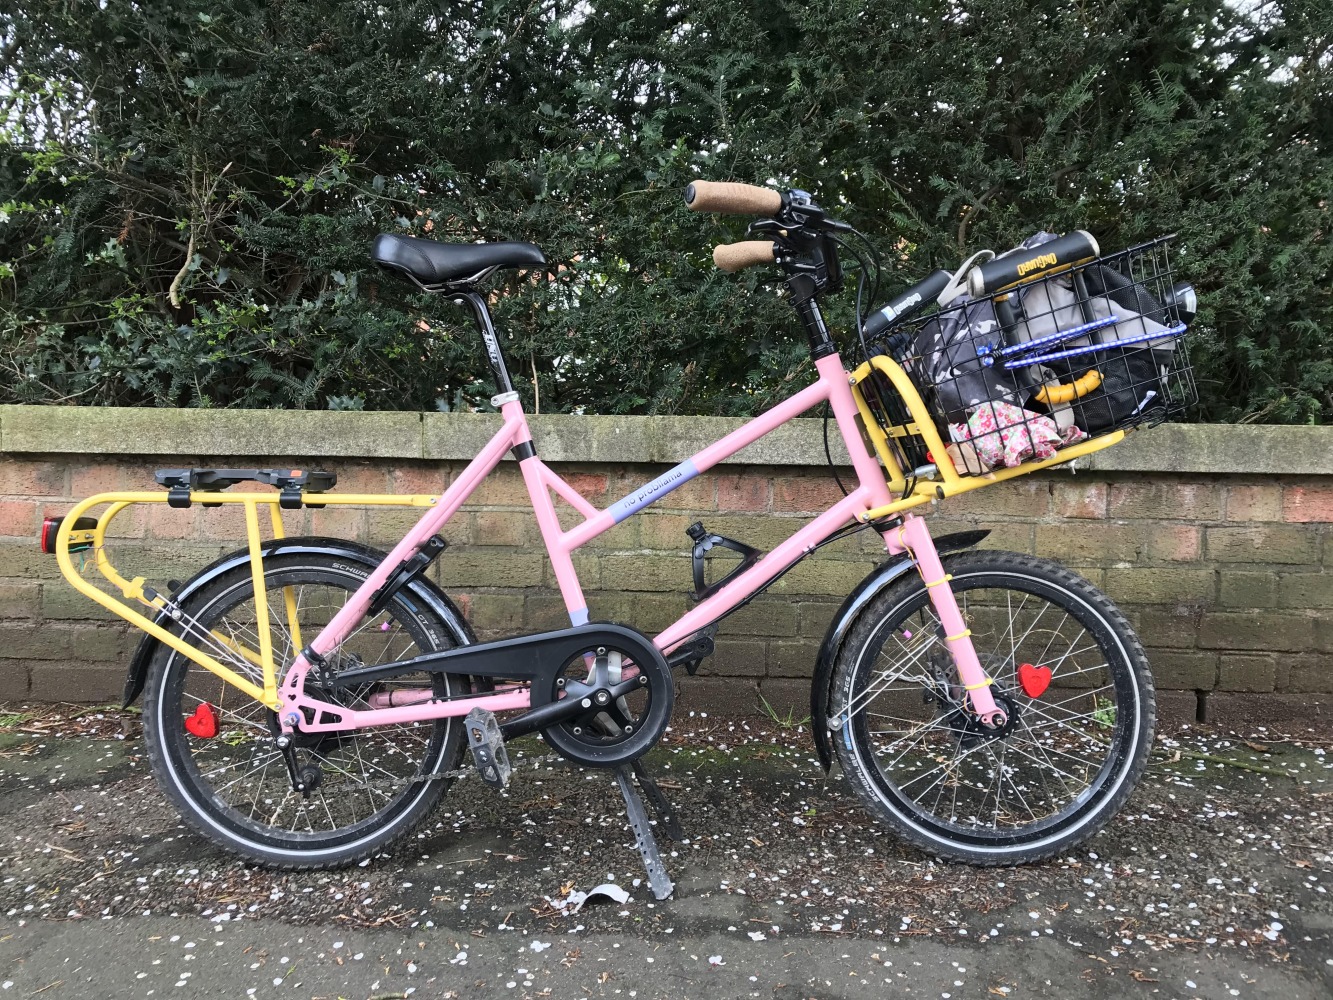 Cycling in Ramadan - A pink cargo bike with yellow front and rear racks, and a basket loaded up with luggage, parked in front of a wall. The bottle is now missing.